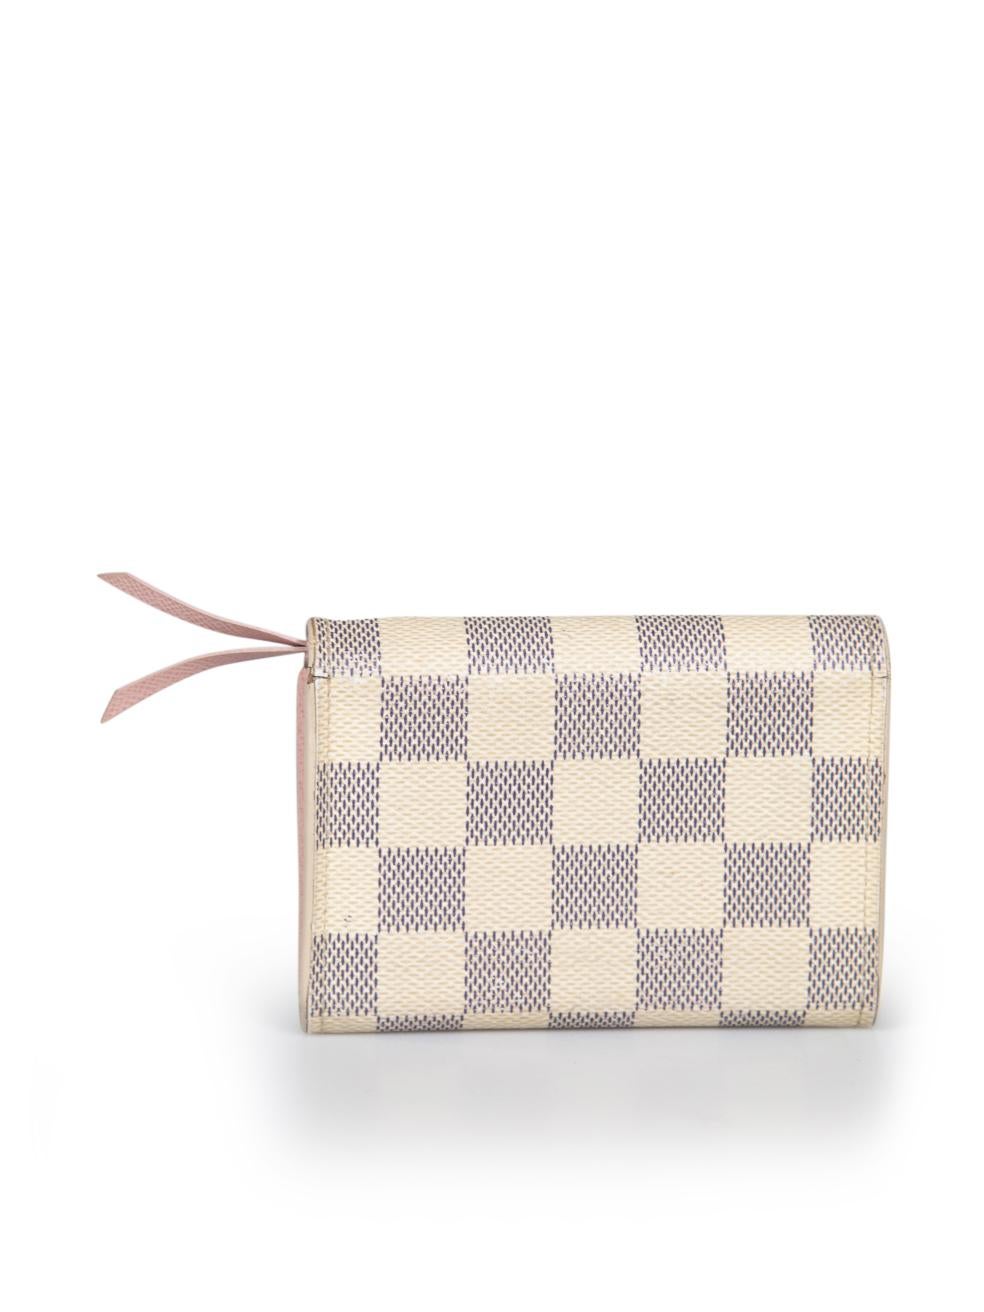 Louis Vuitton Damier Azur And Rose Ballerine Rosalie Coin Purse In Excellent Condition For Sale In London, GB